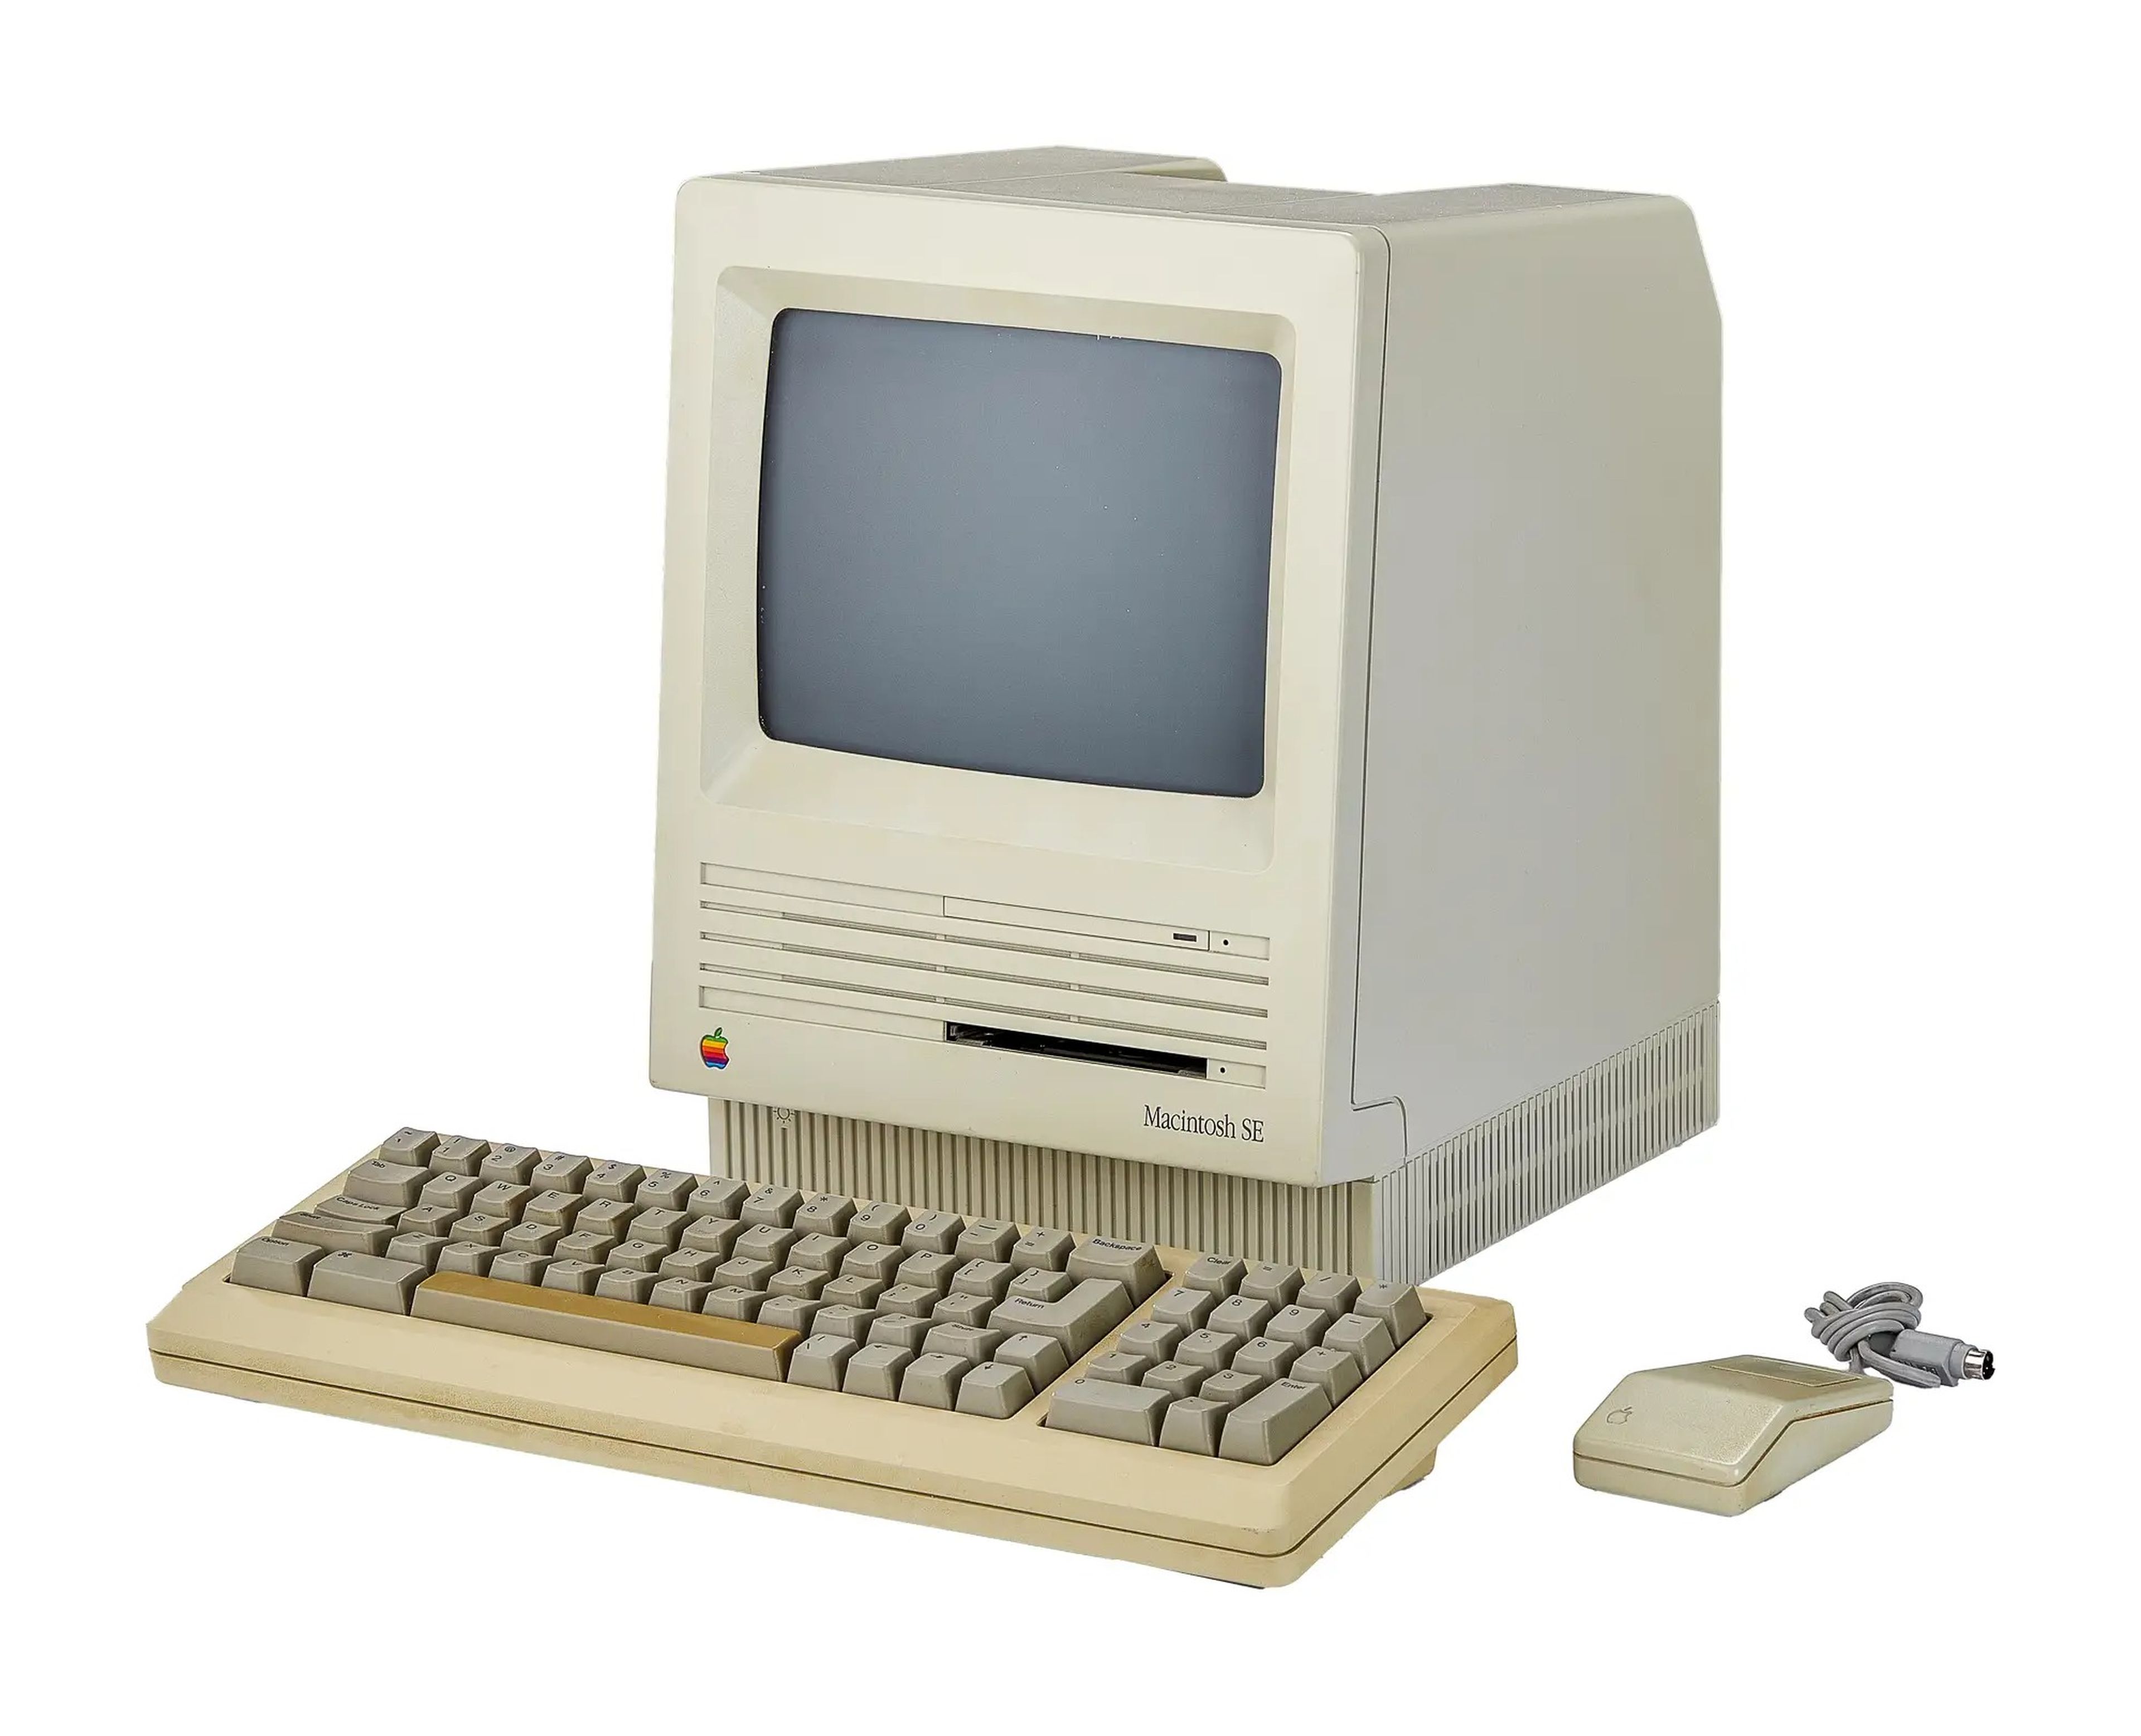 1986 Apple Macintosh SE computer including a keyboard and mouse